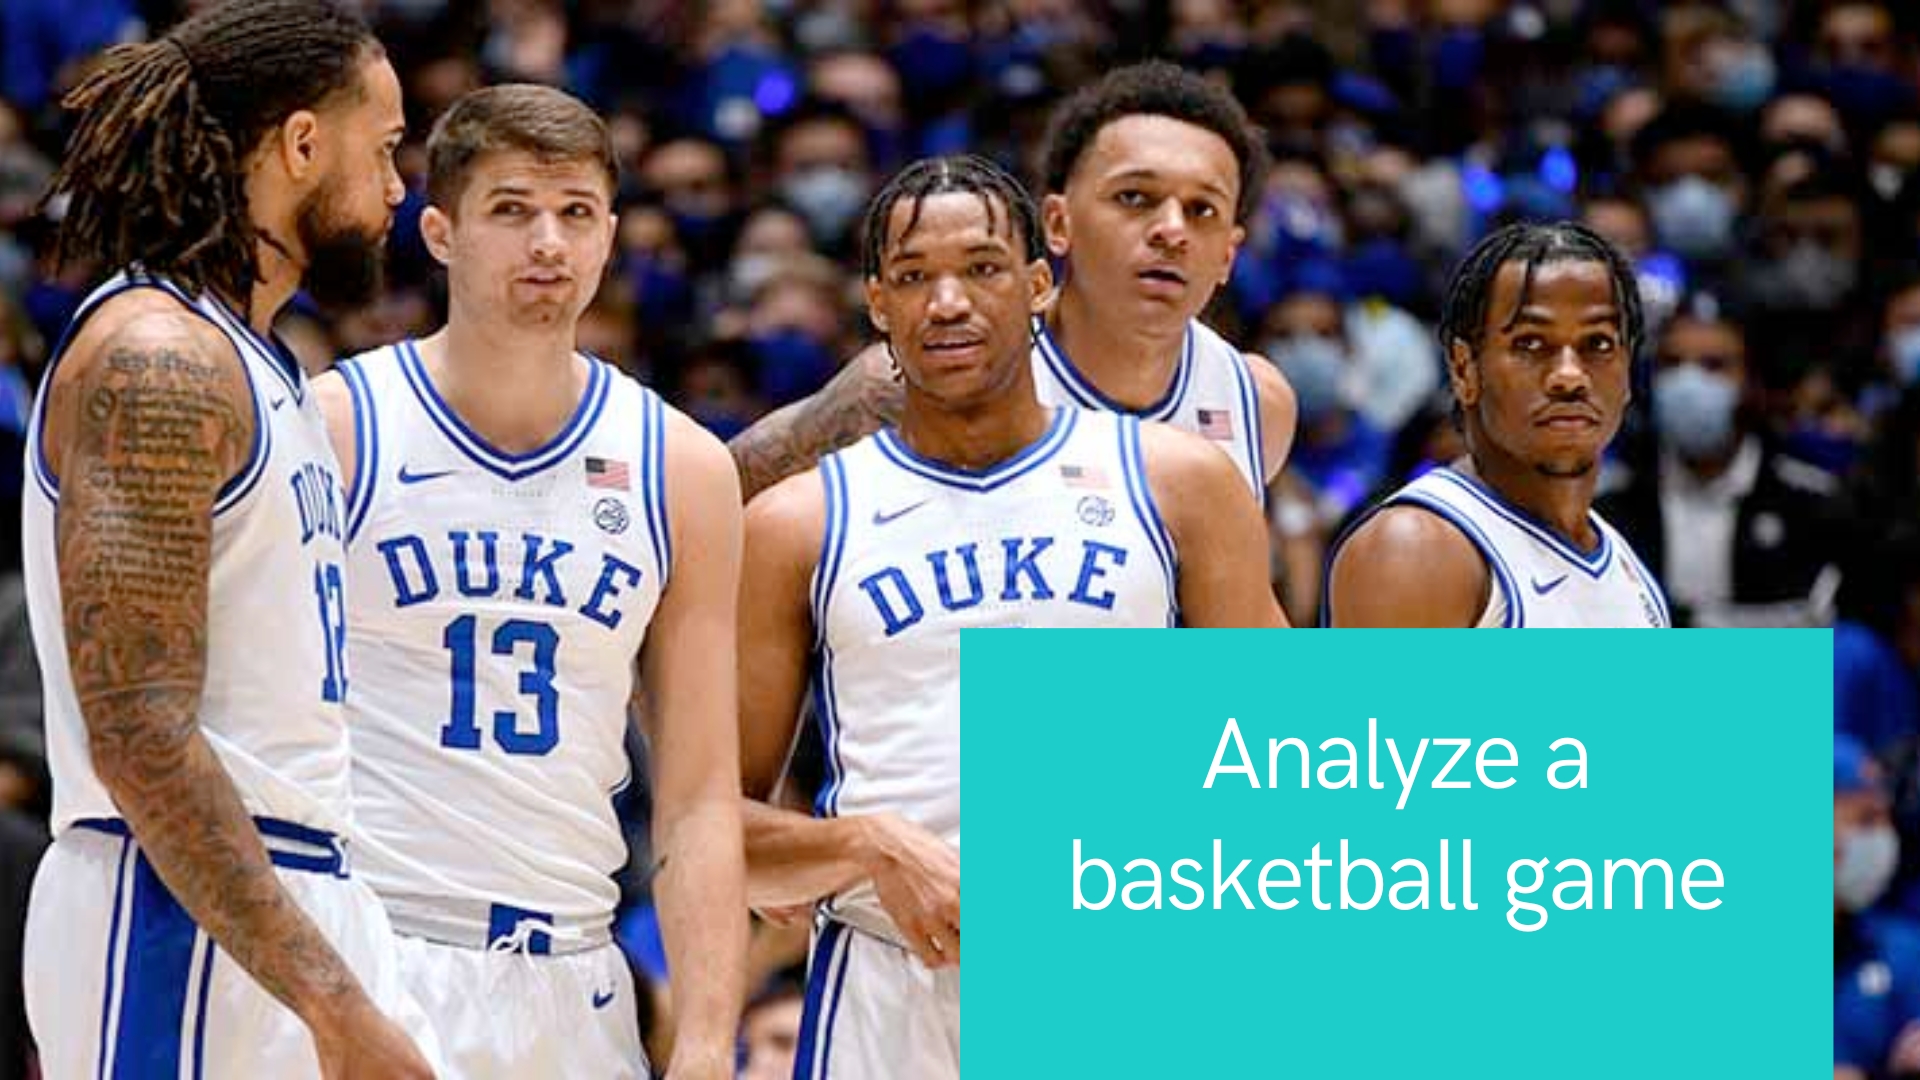 How to analyze a basketball game